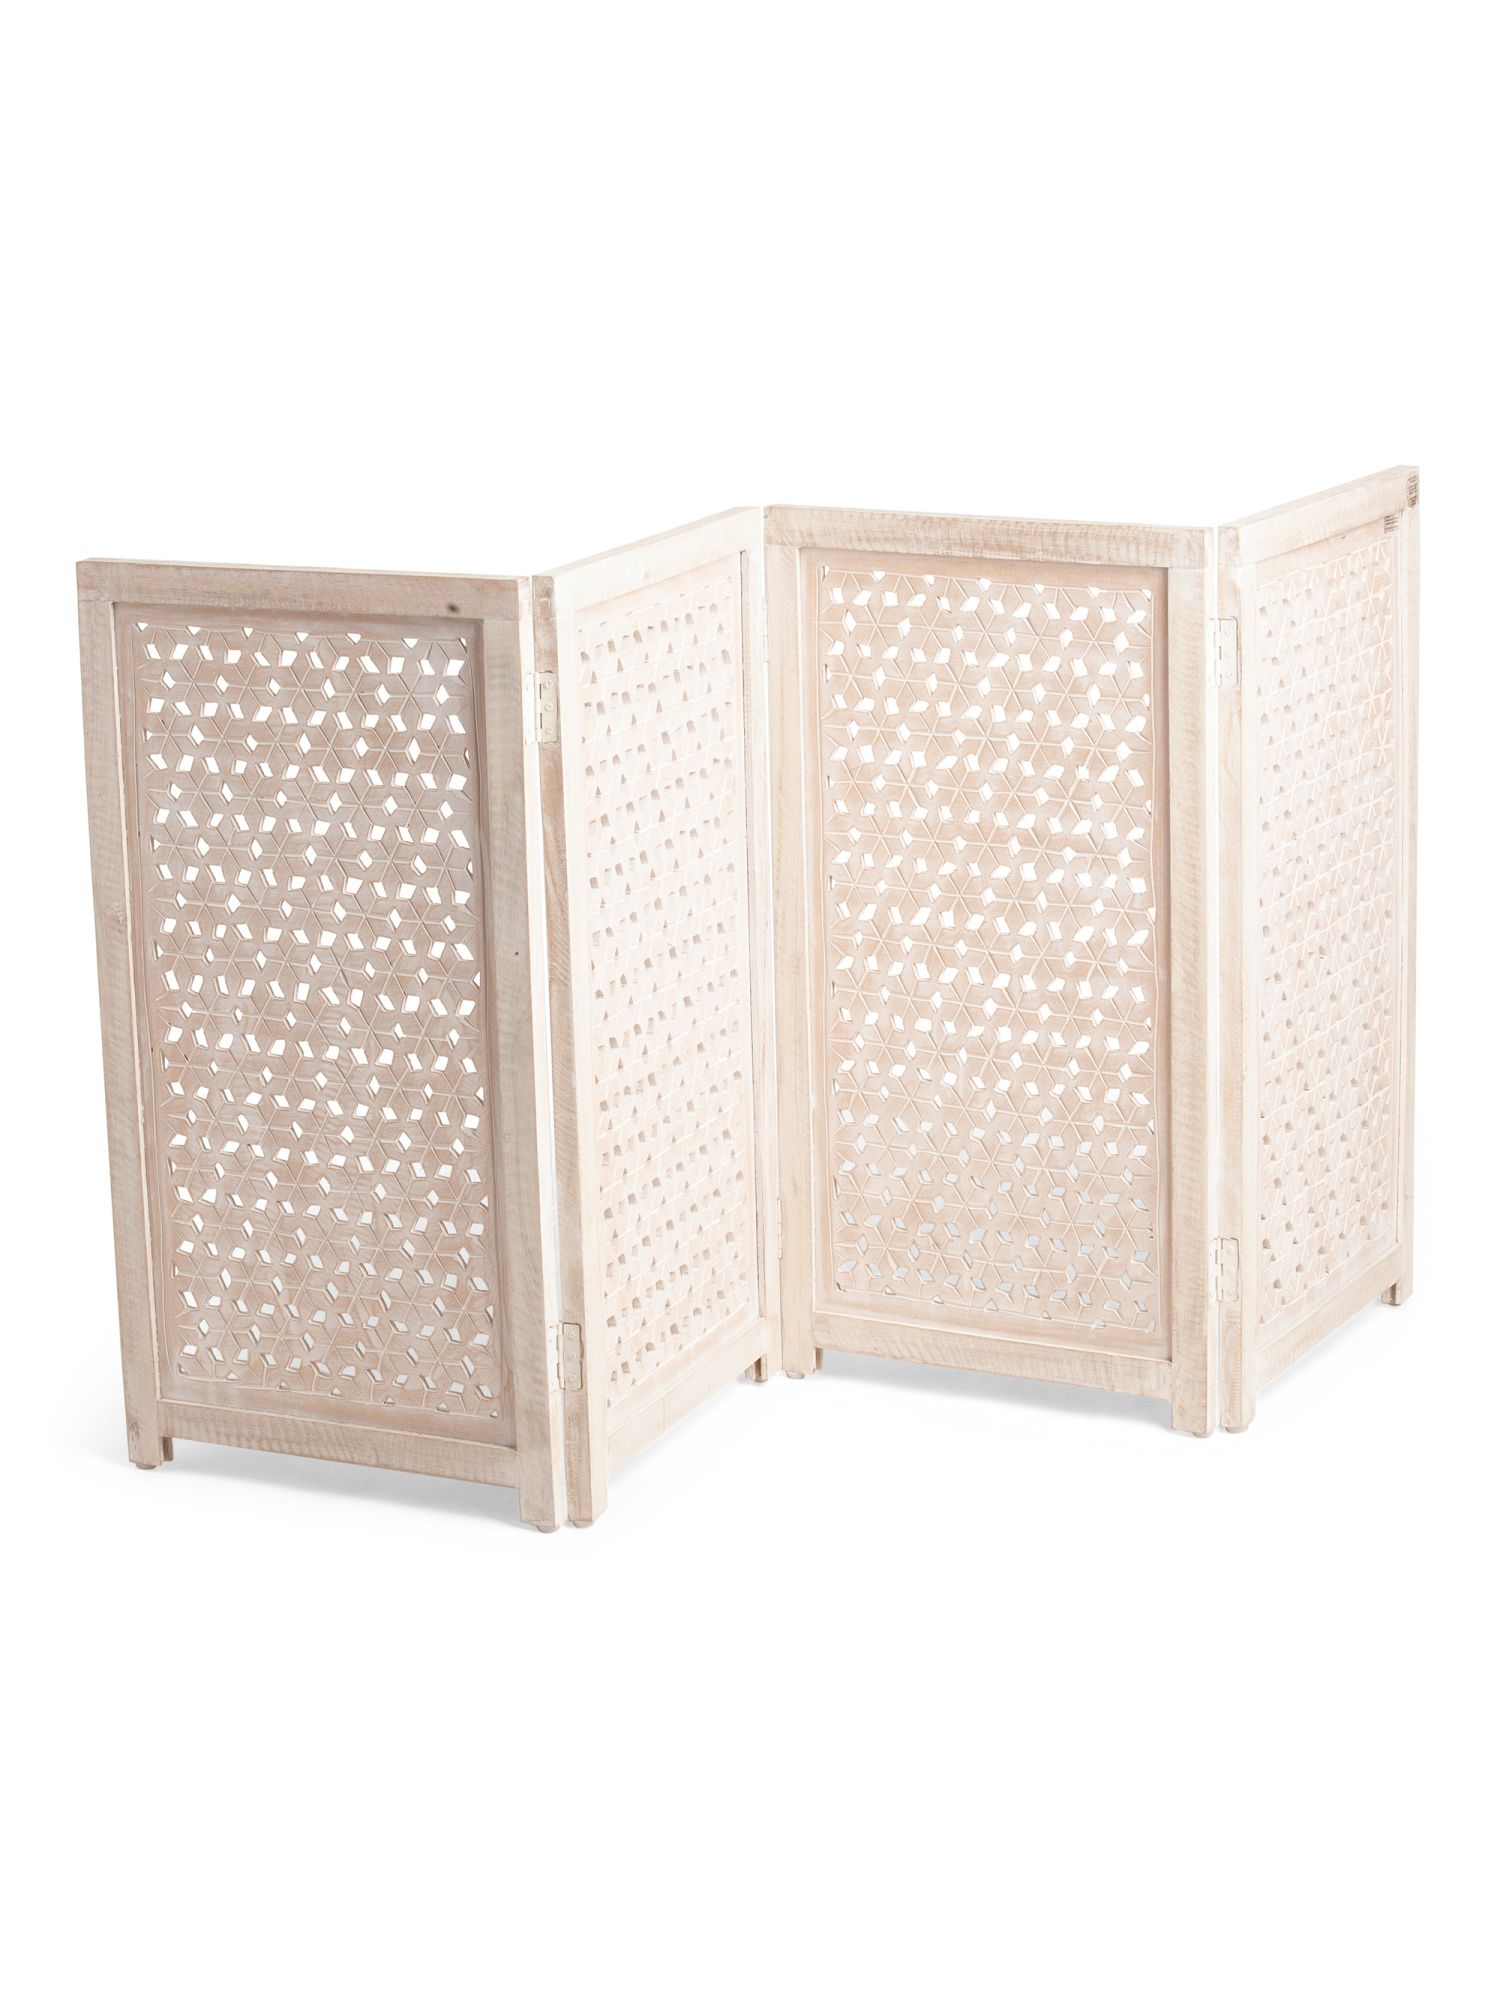 72x34 Carved Wooden Pet Gate | TJ Maxx